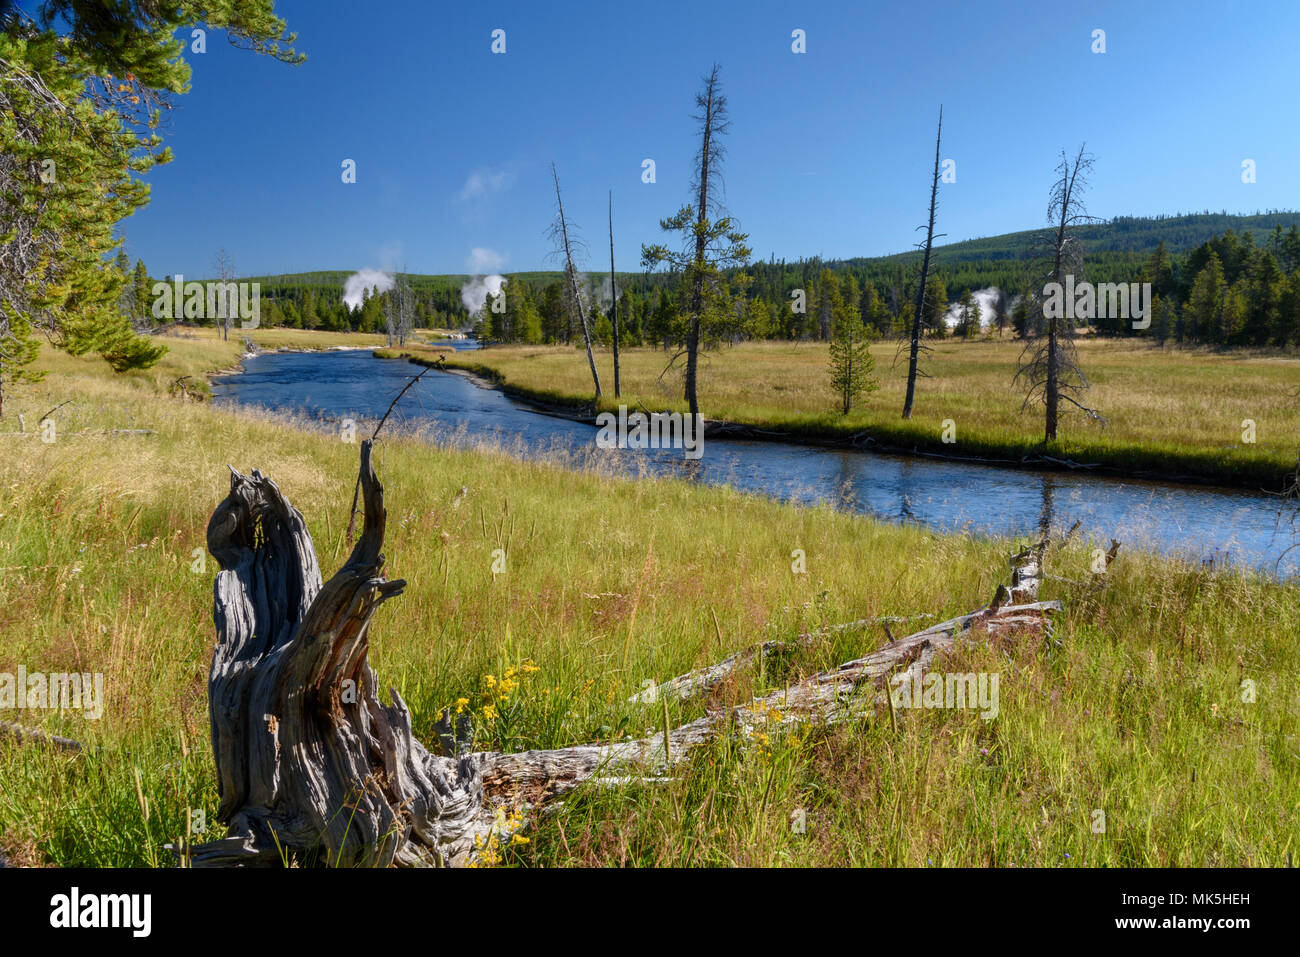 Base of a dead treen pointing towards a river surrounded by green grassy meadows with green forest covering the hills under a clear blue sky. Stock Photo